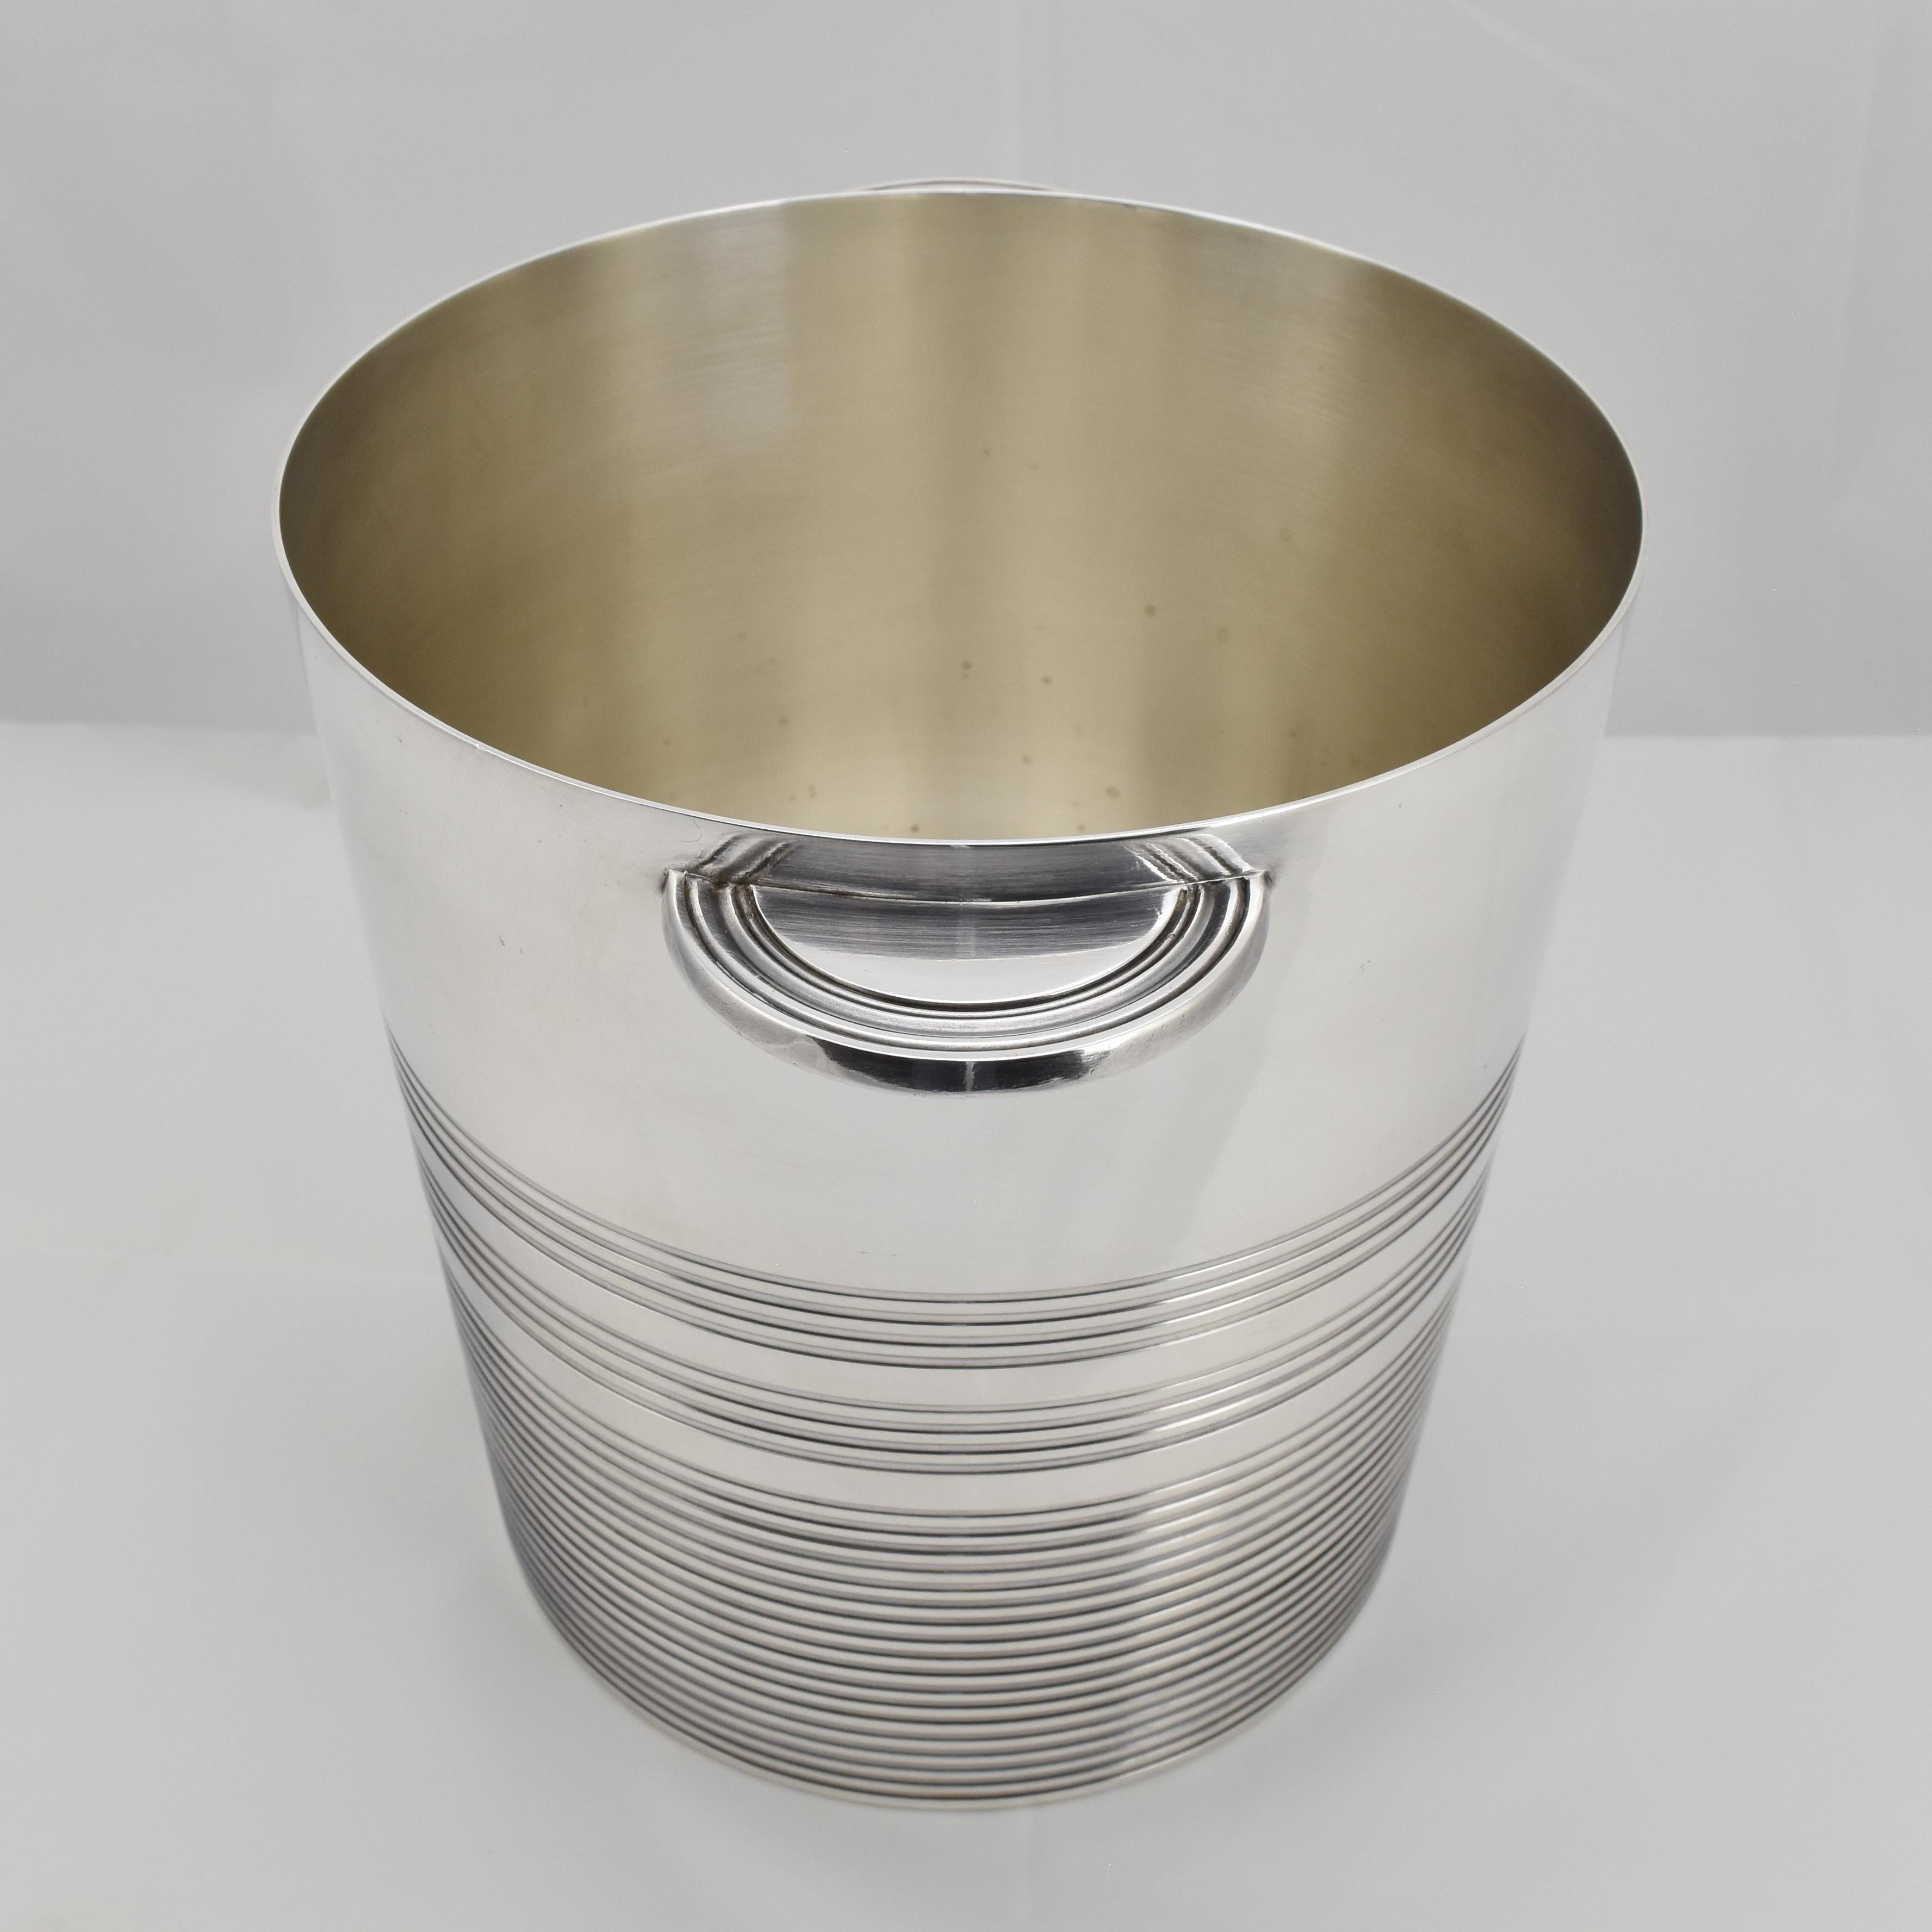 Mid-20th Century French Art Deco Champagne Ice Bucket / Wine Cooler by Orfèvrerie Ercuis Paris For Sale